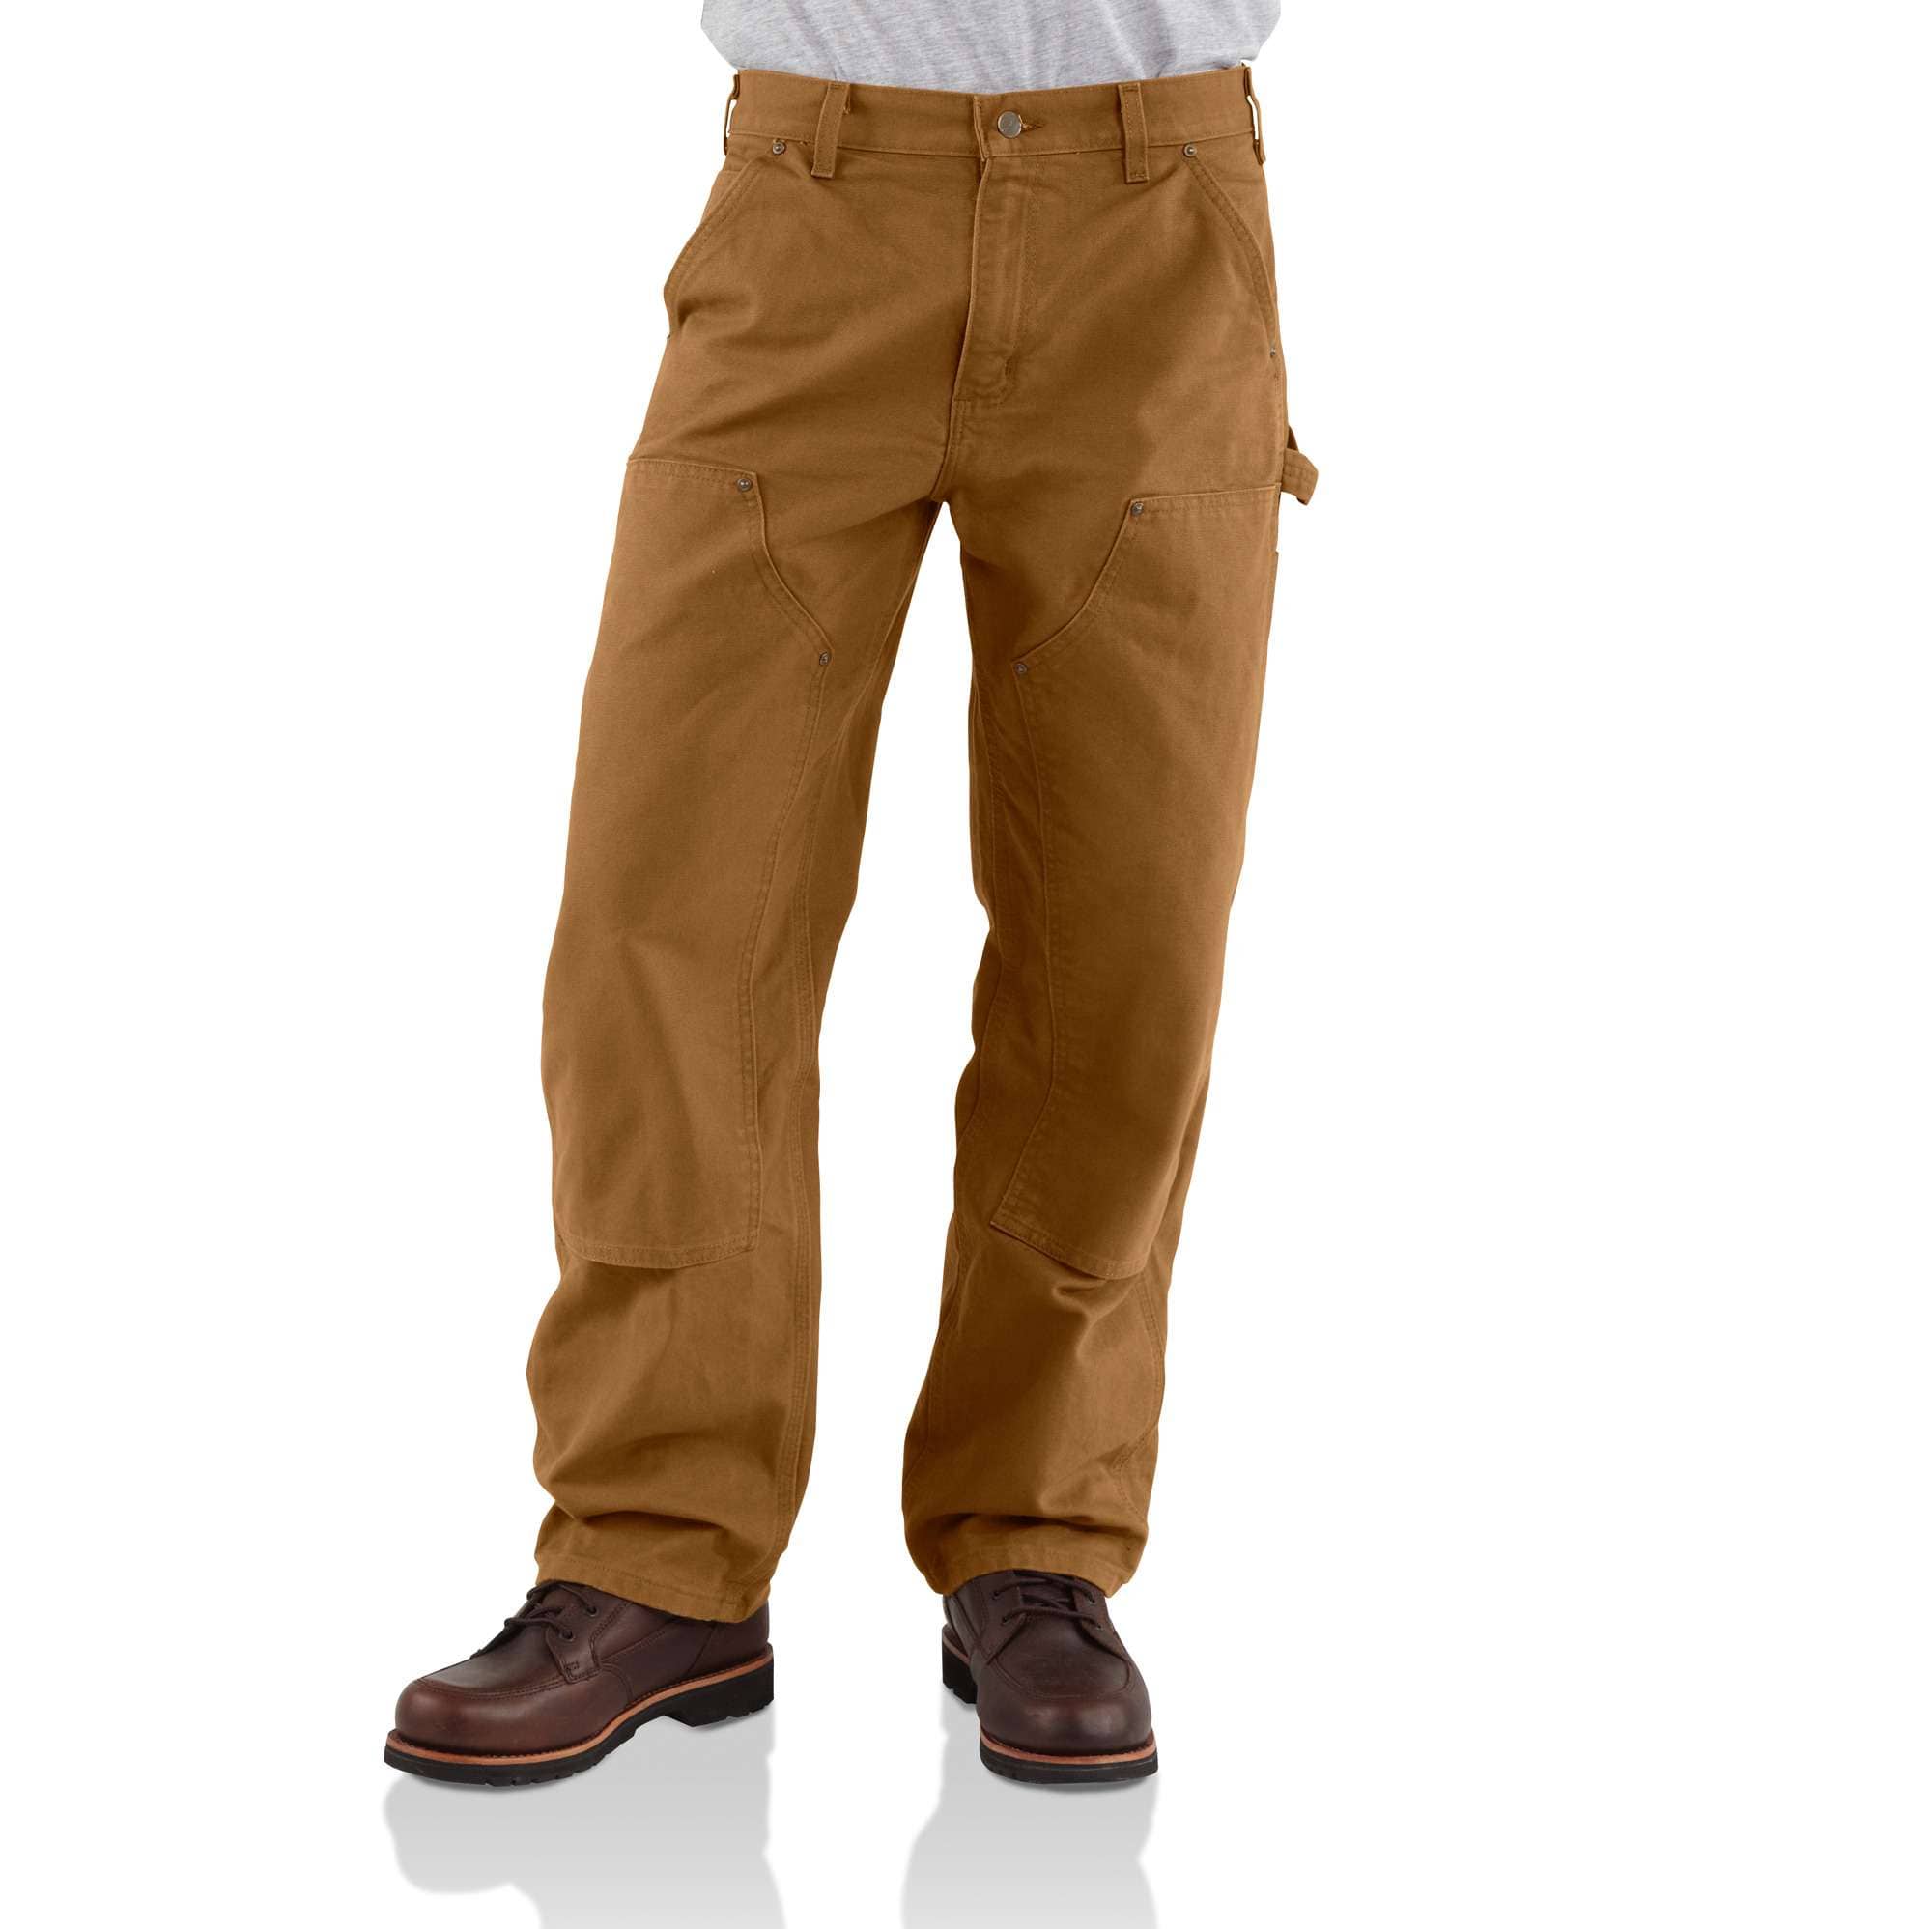 Men's Utility Double-Knee Work Pant - Loose Fit - Rugged Flex